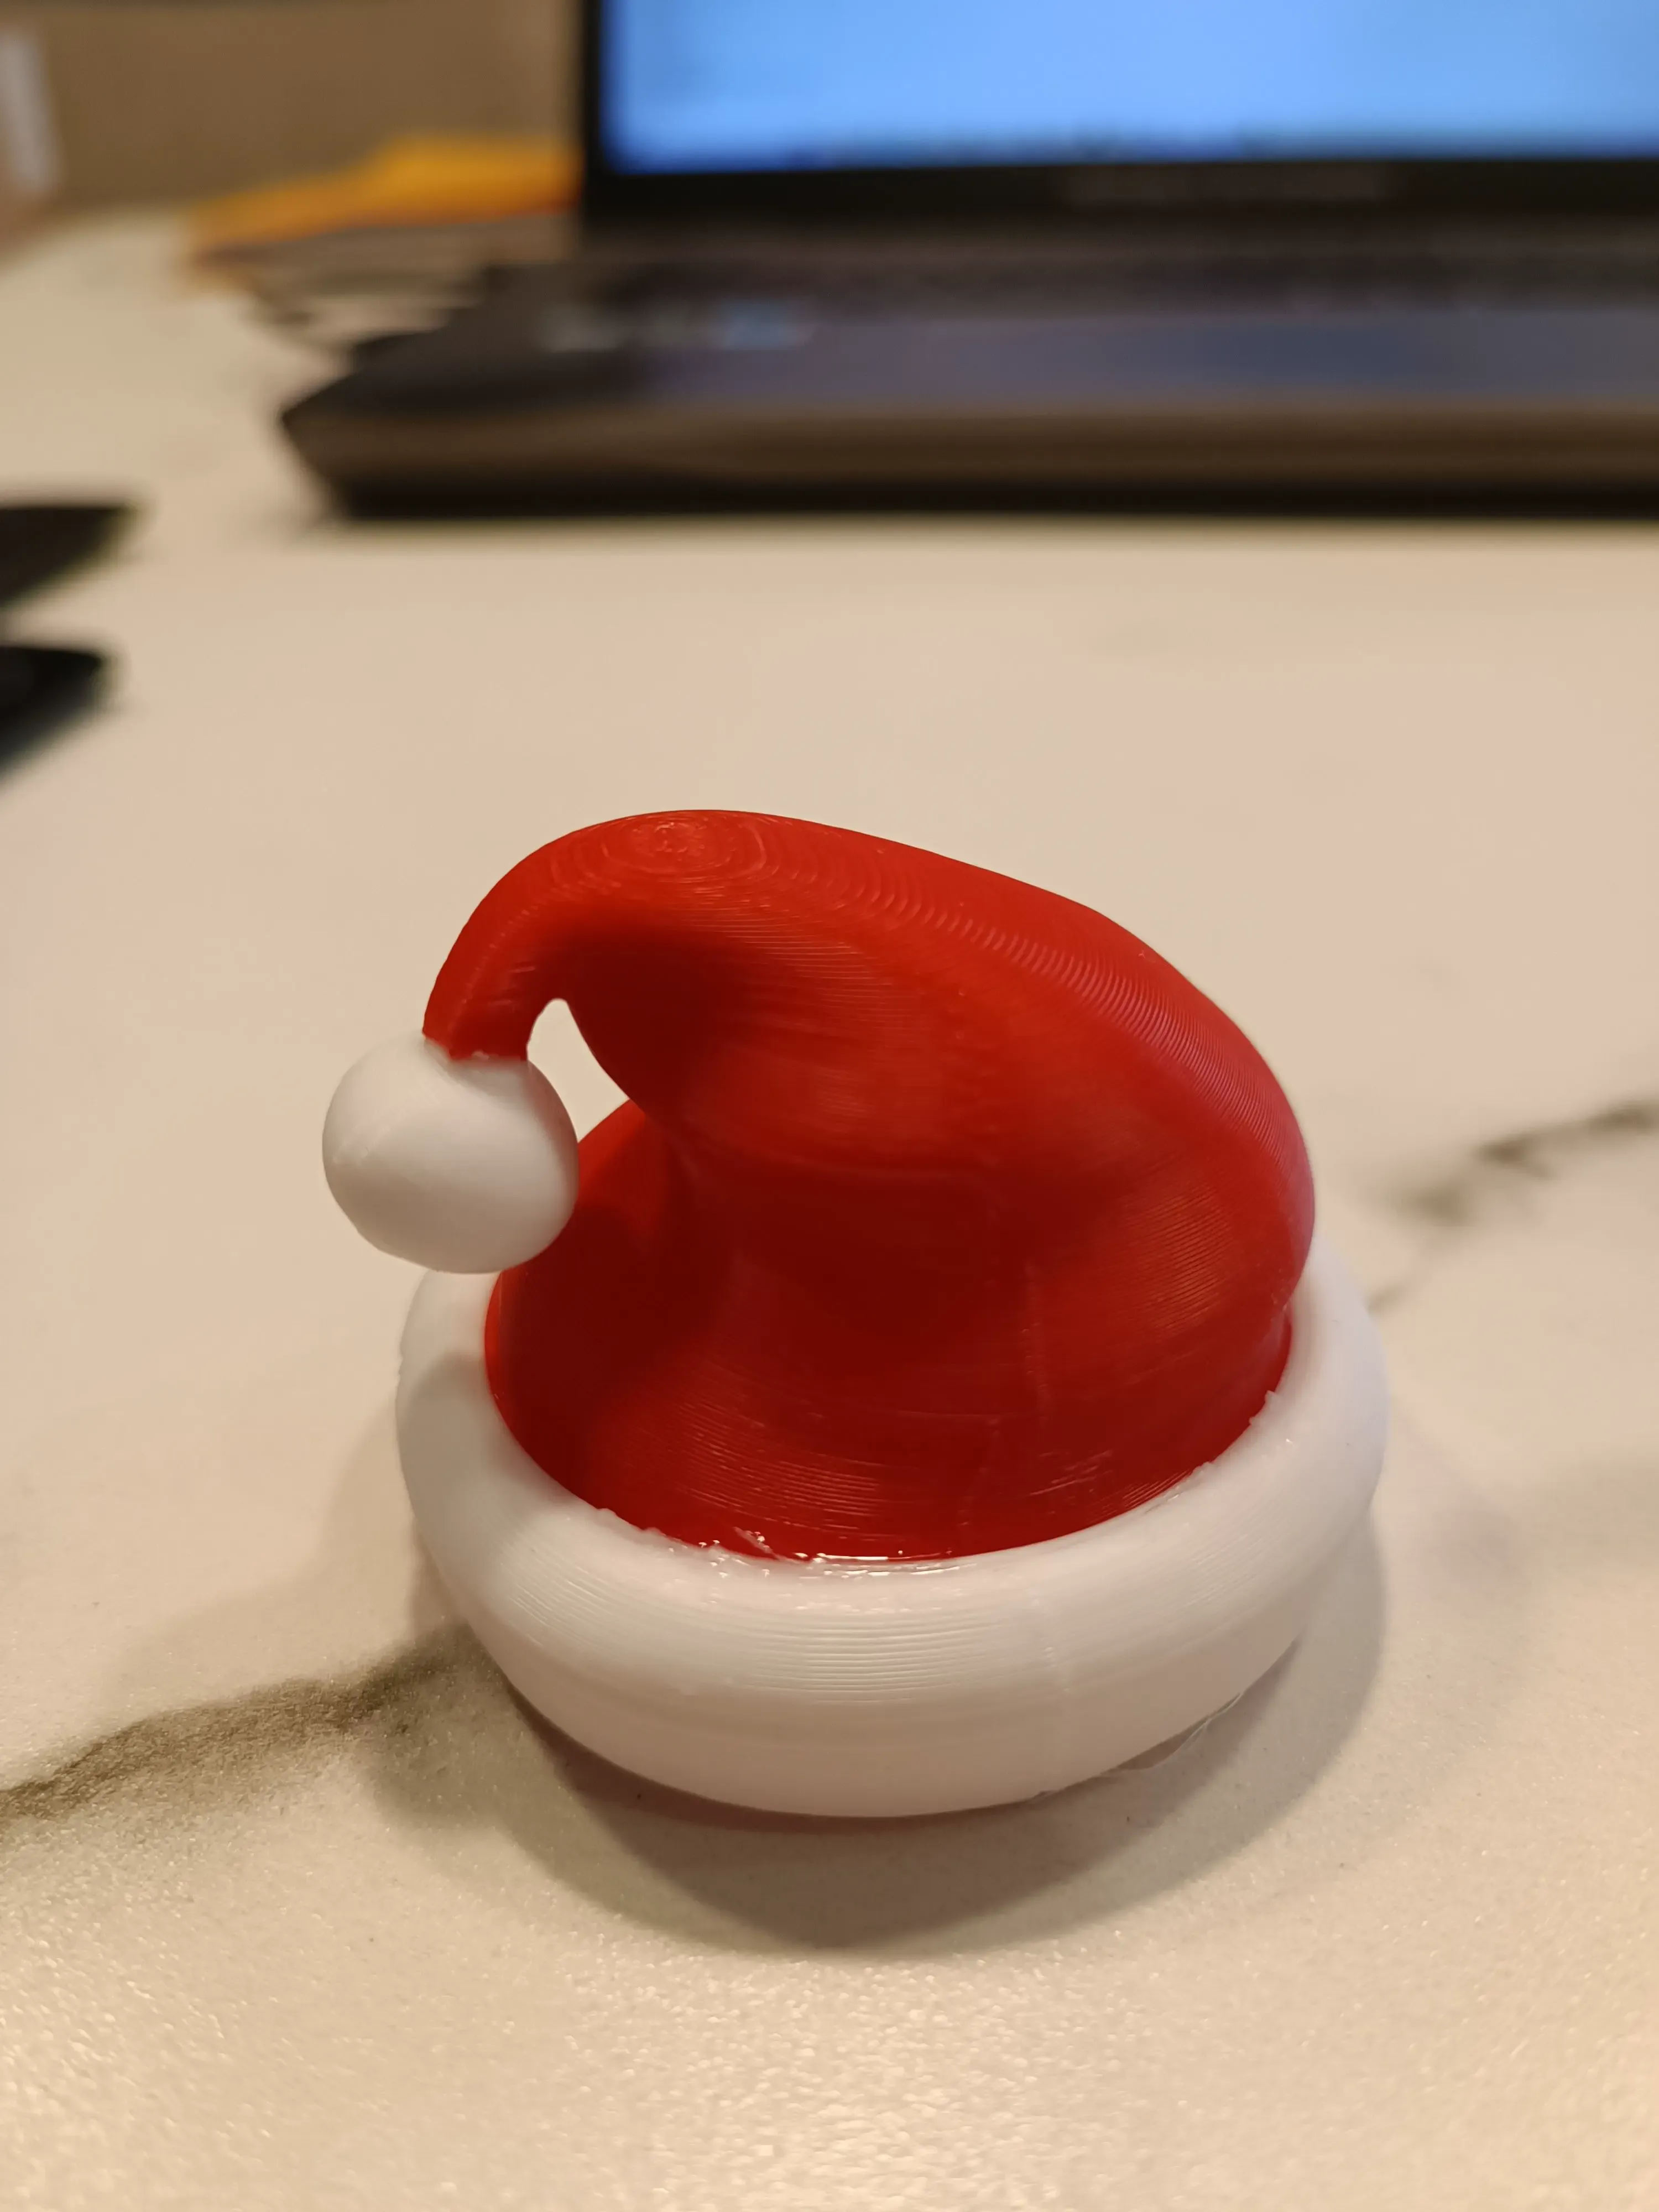 STITCH WITH HIS CHRISTMAS HAT - CHRISTMAS STITCH 3D print mo